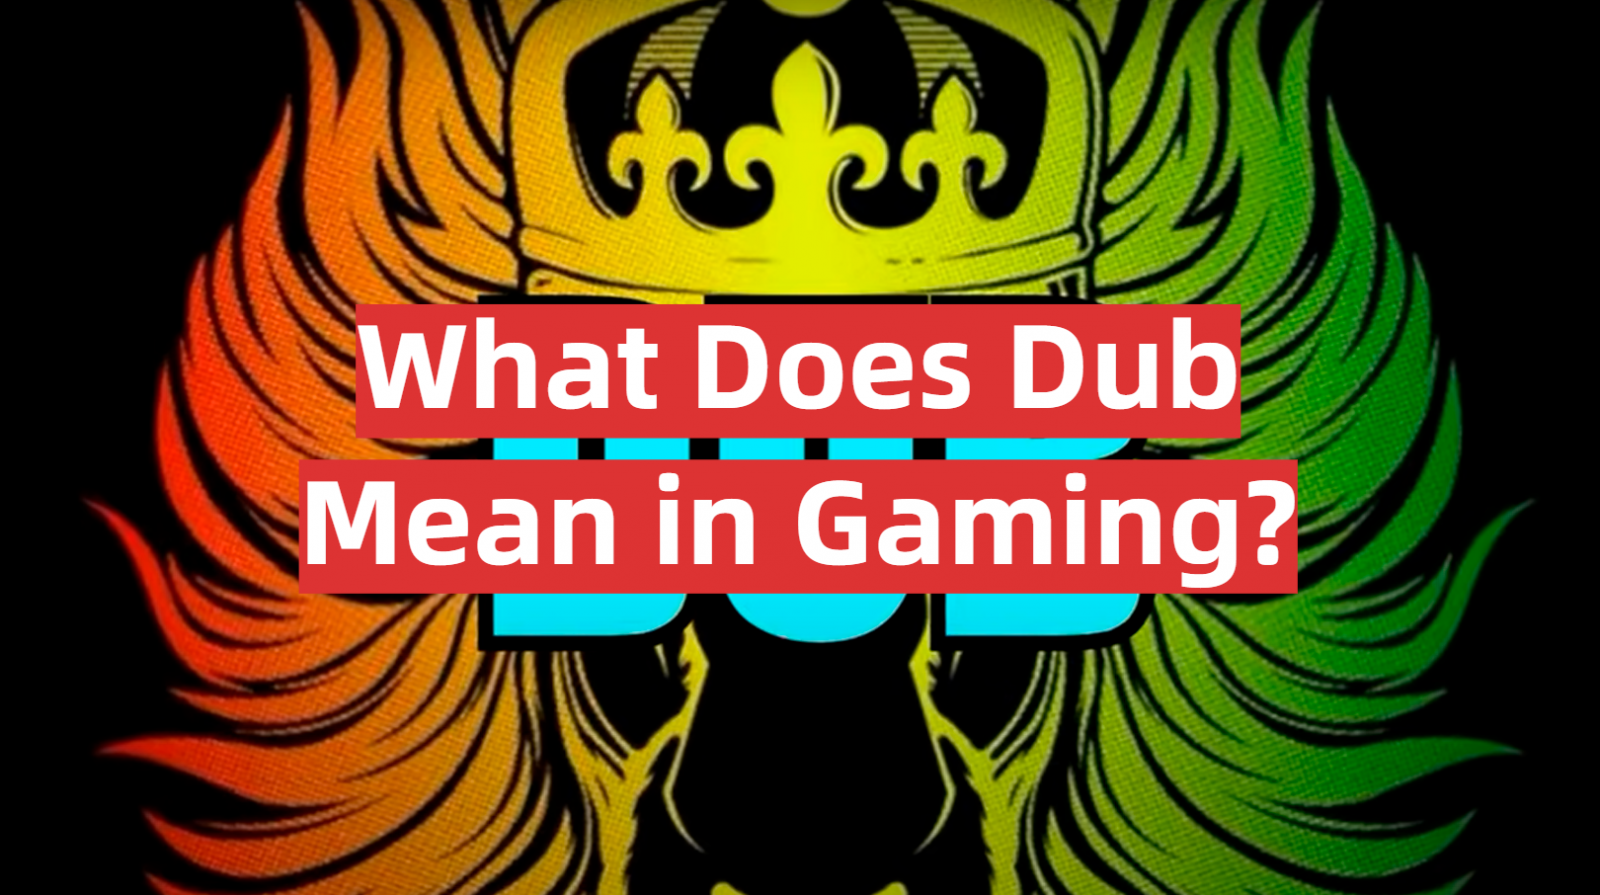 What Does Dub Mean in Gaming?